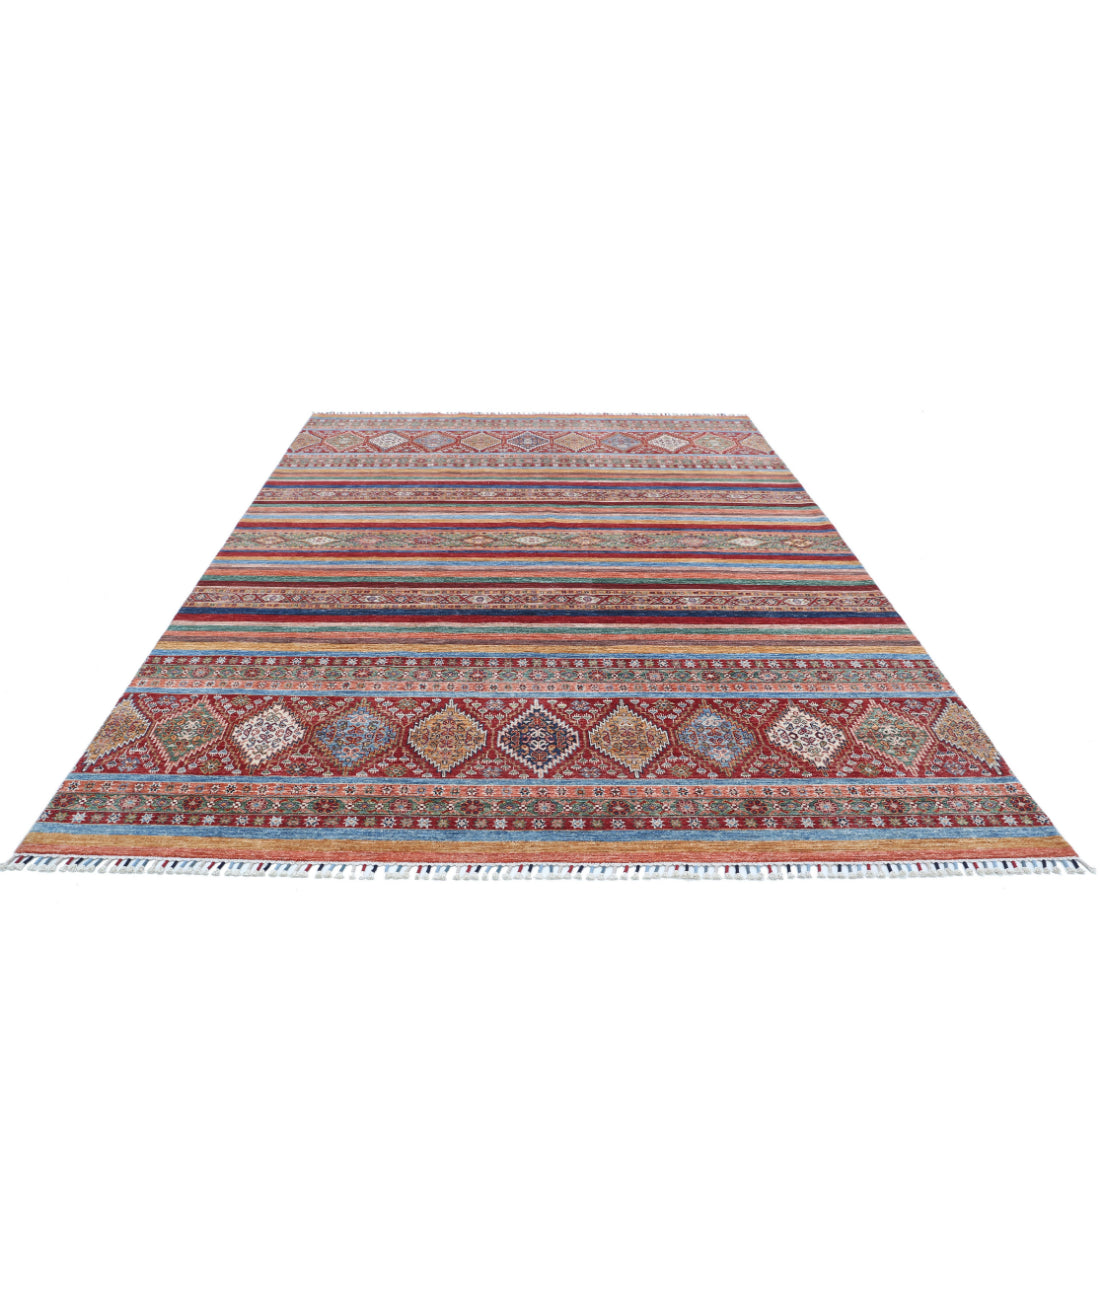 Hand Knotted Khurjeen Wool Rug - 8'1'' x 11'0'' 8'1'' x 11'0'' (243 X 330) / Multi / Multi